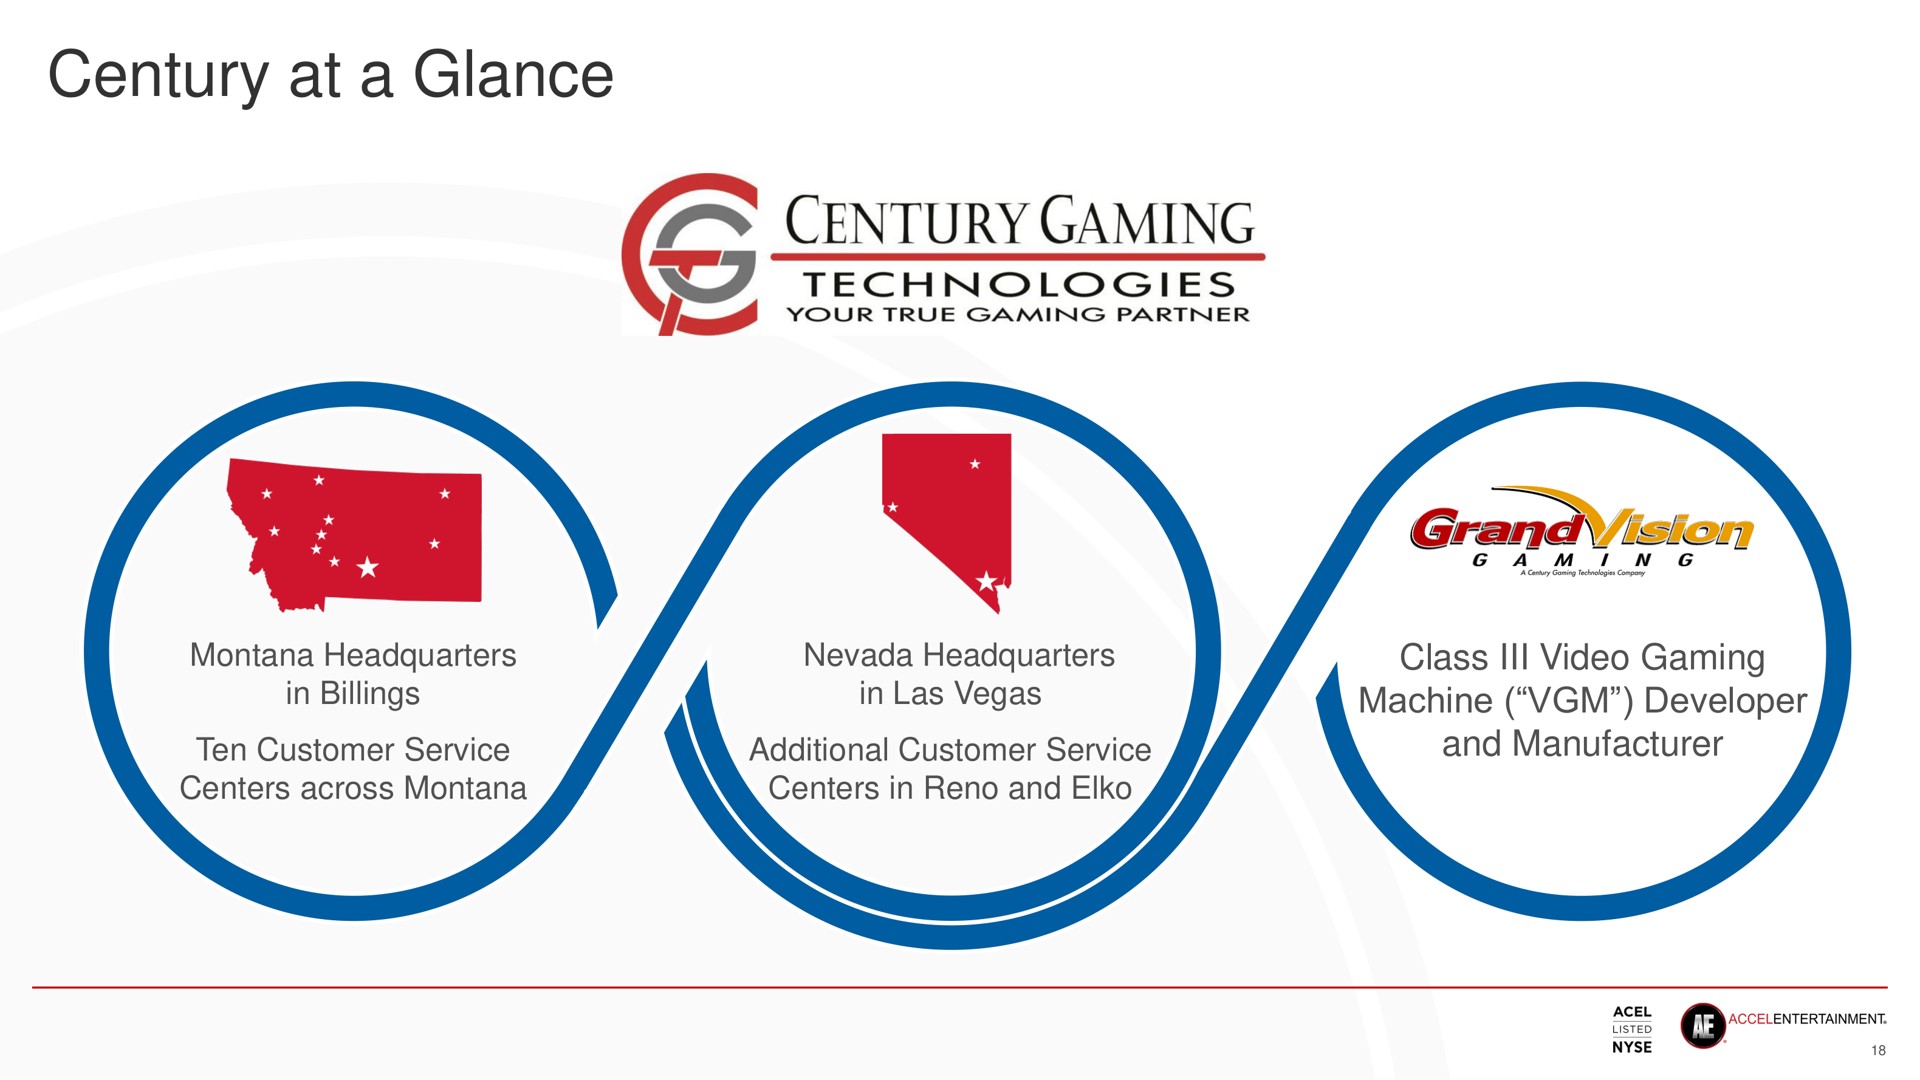 century at a glance gaming | Accel Entertaiment